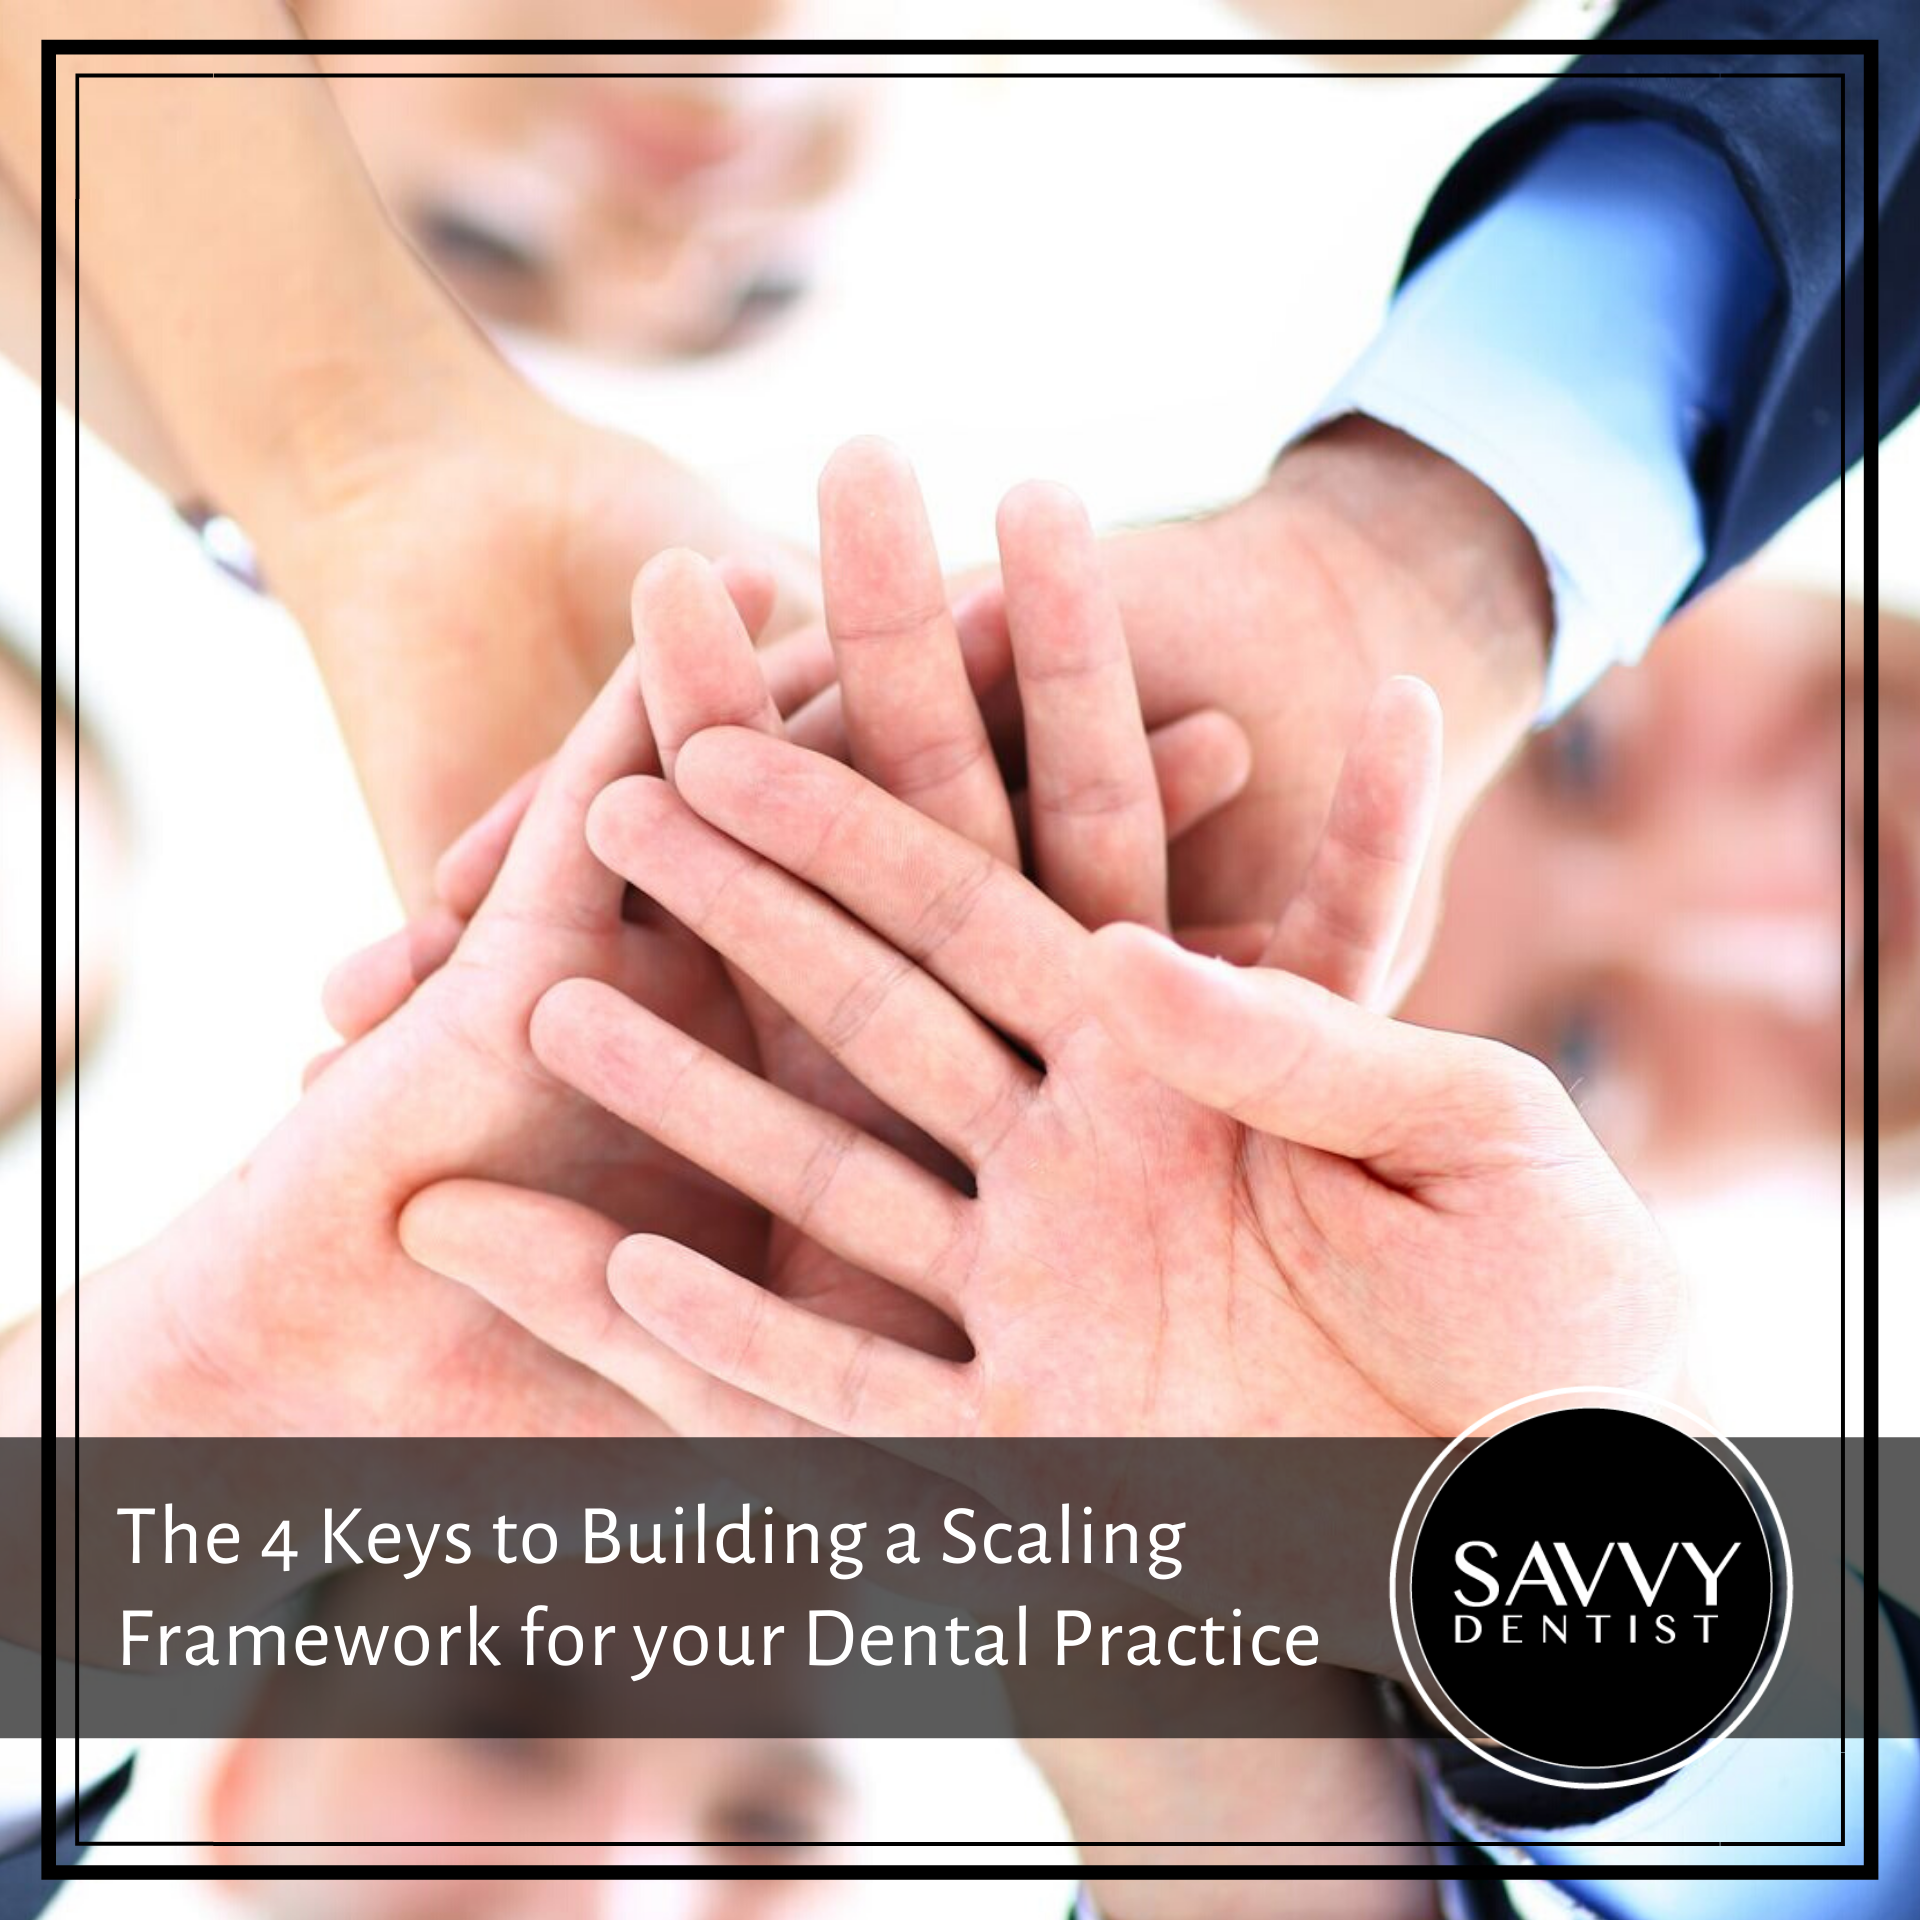 The 4 Keys to Building a Scaling Framework for Your Dental Practice